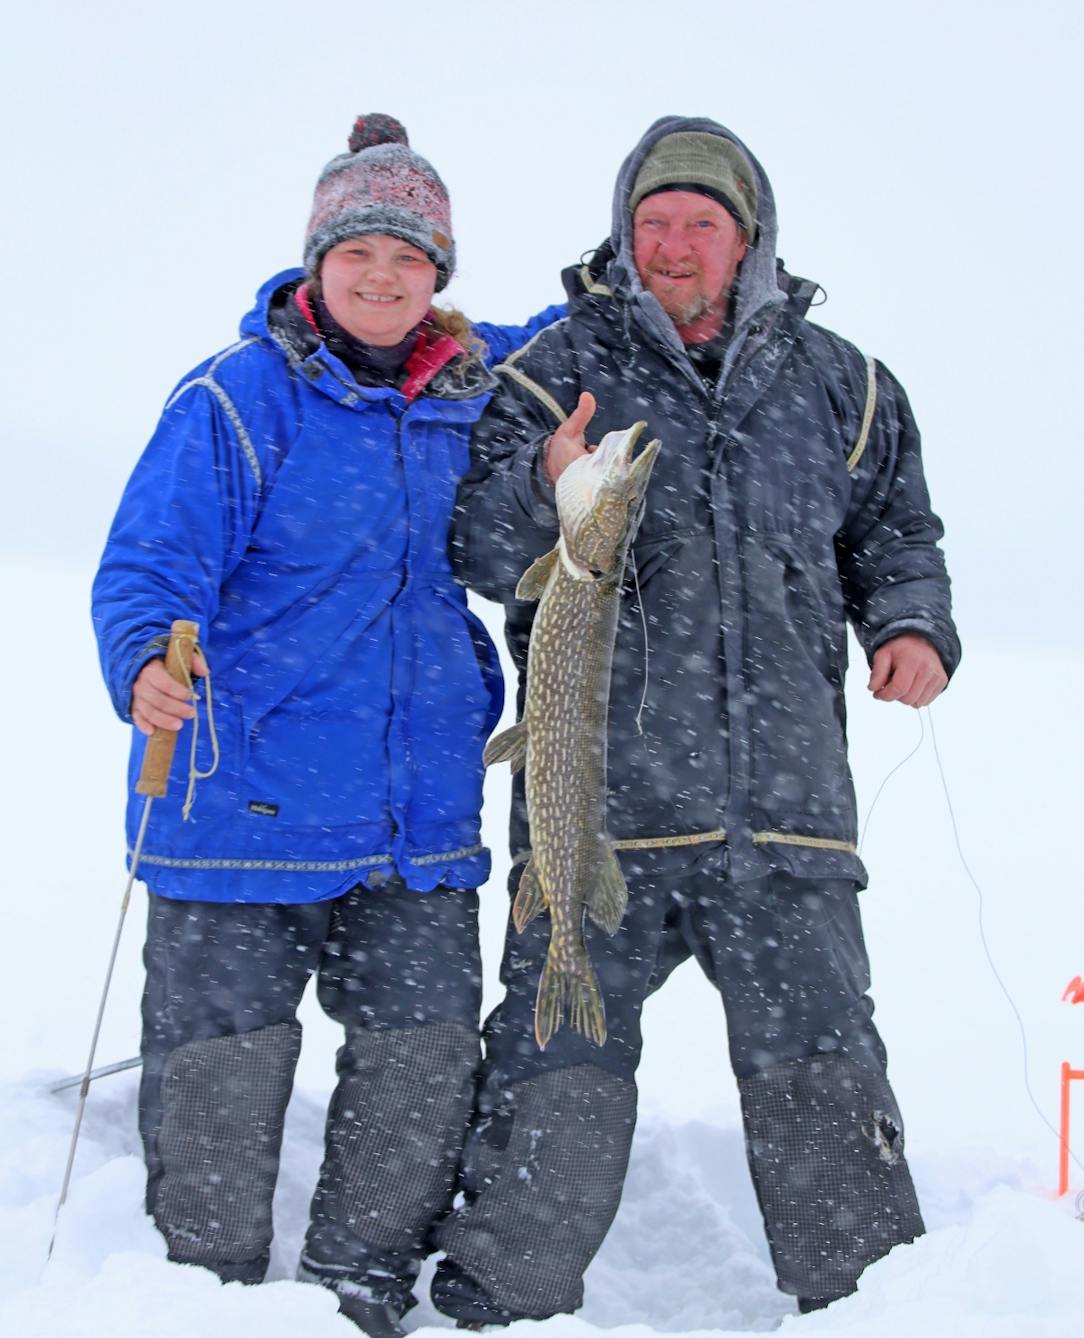 Dogs do the heavy lifting on anglers' BWCA deep-snow ventures